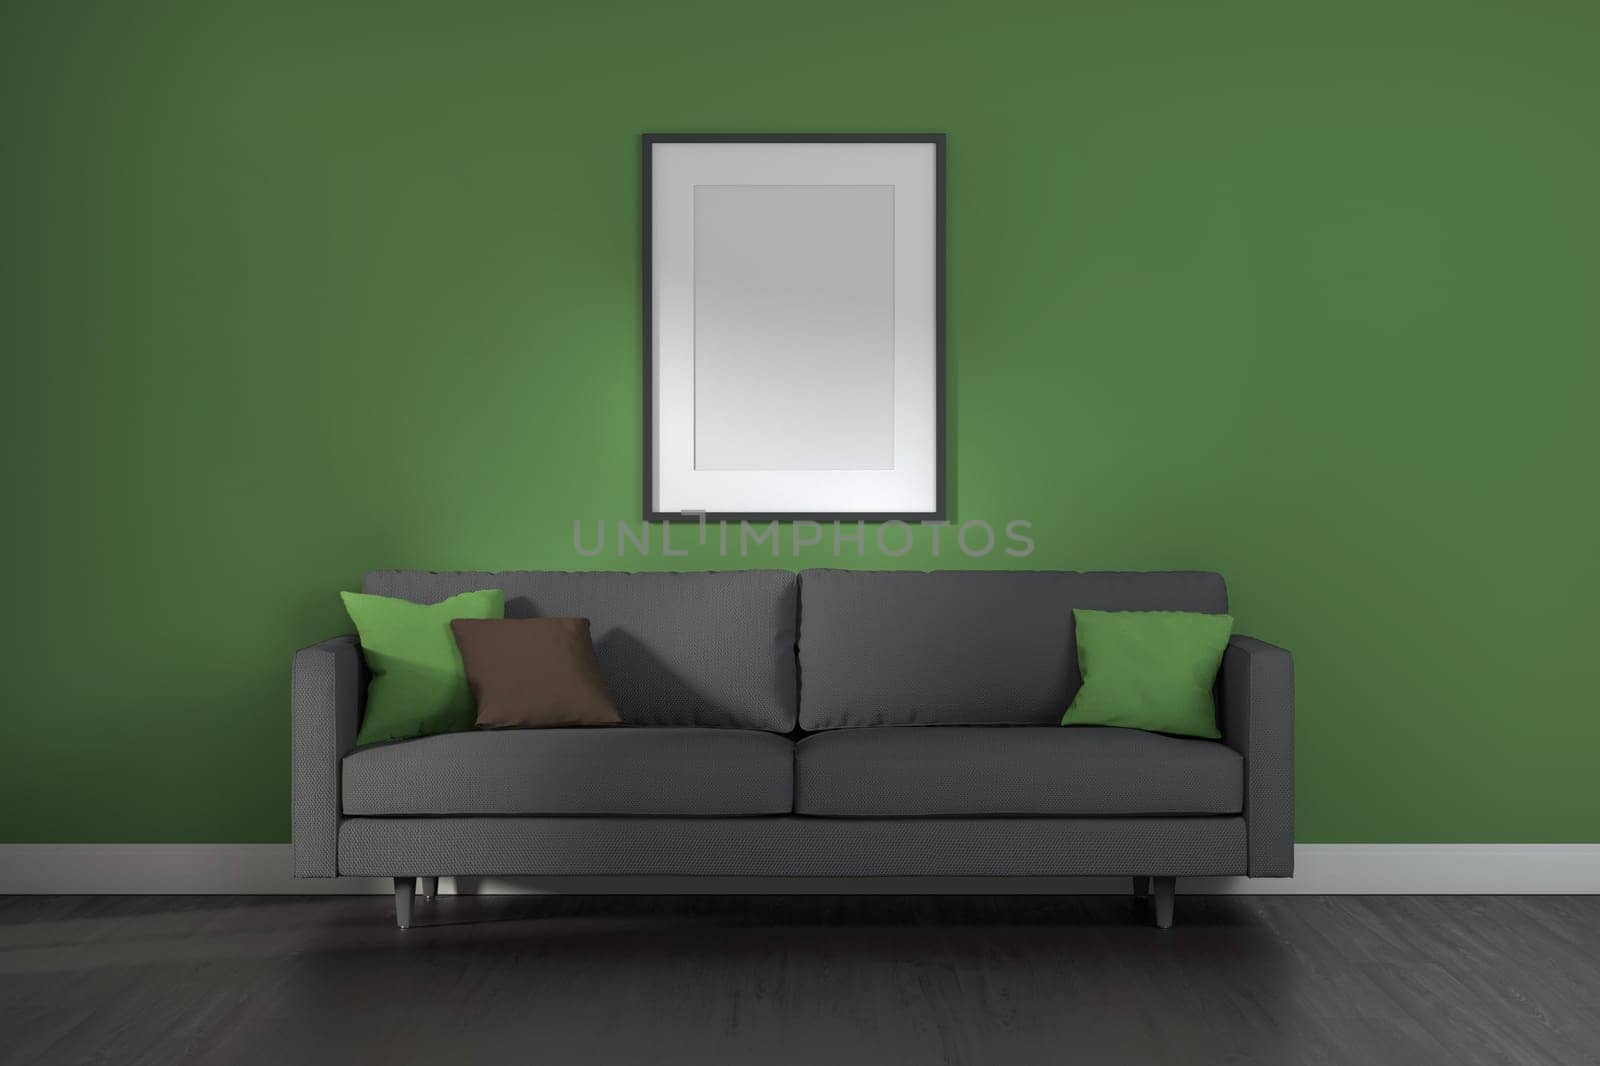 Living room interior with gray sofa, pillows, green plaid and frame on green wall background. 3D rendering.